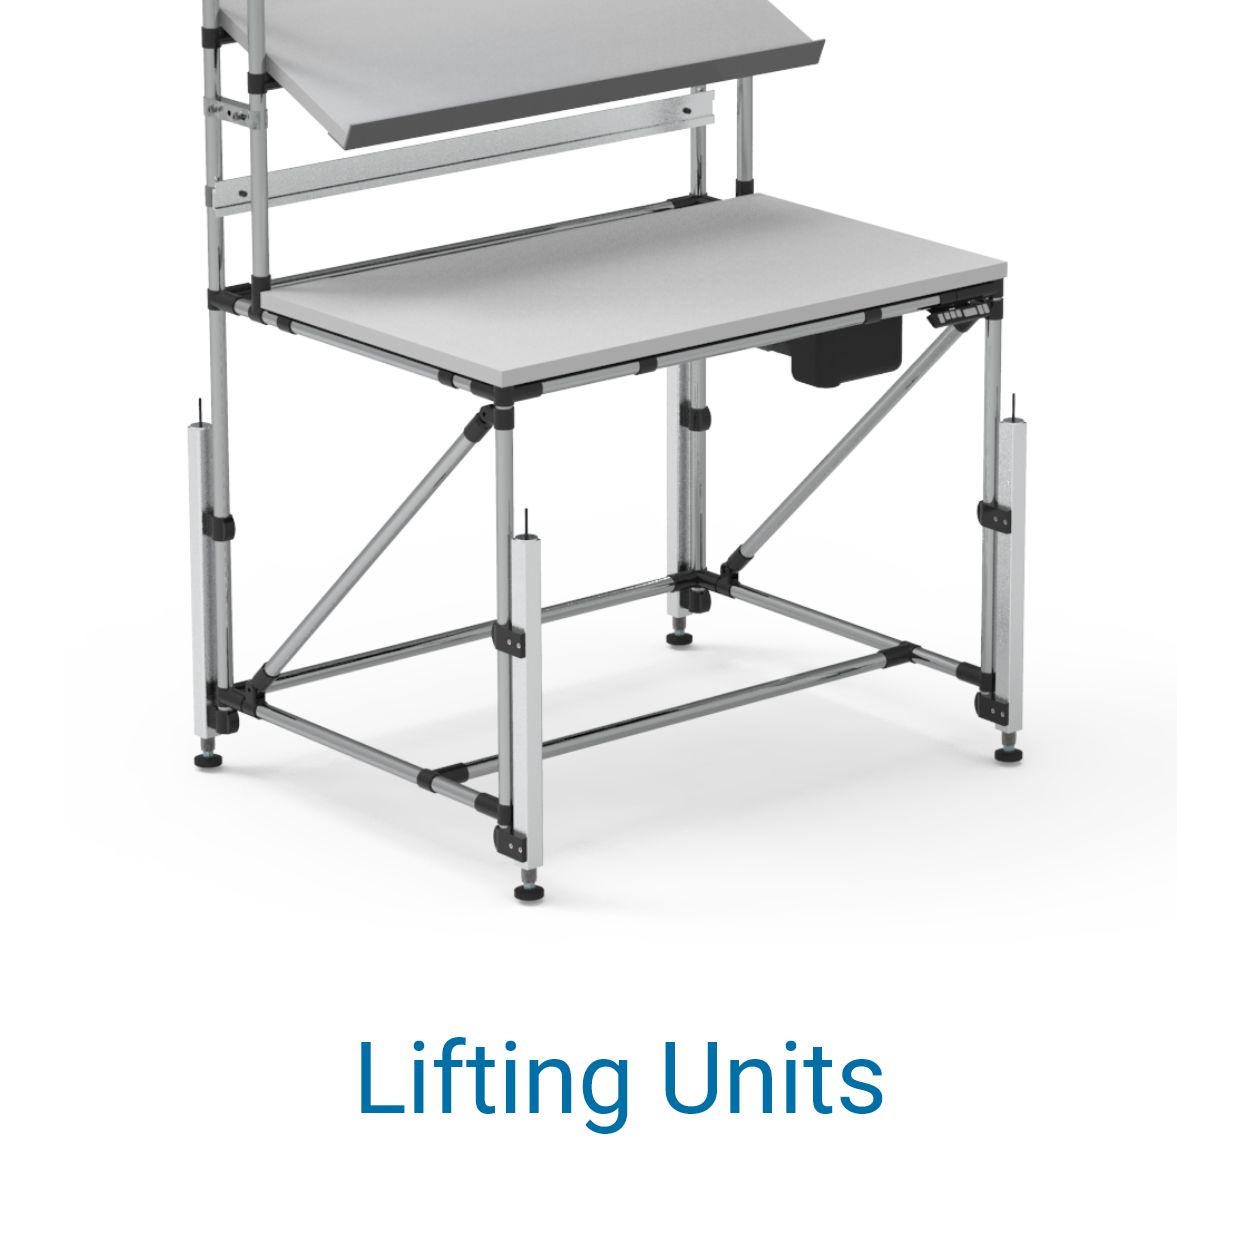 Lifting units for assembly workstations from BeeWaTec